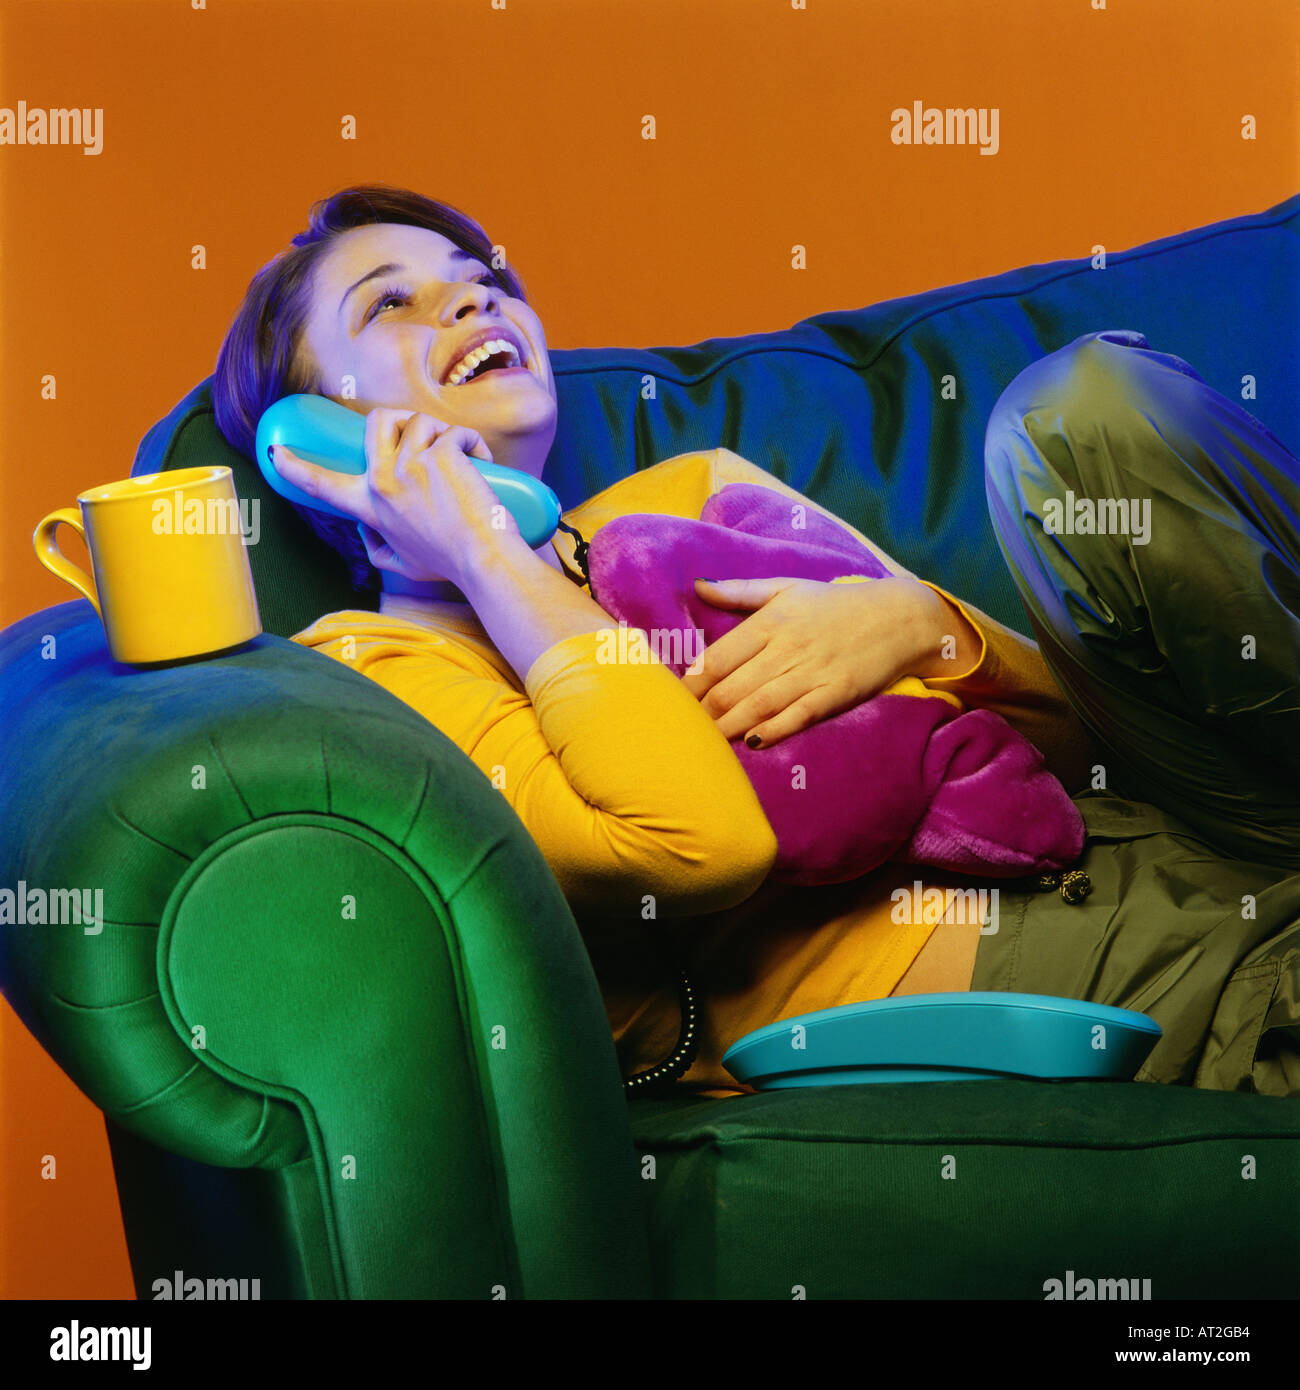 A woman relaxing on a sofa and speaking on the telephone Stock Photo